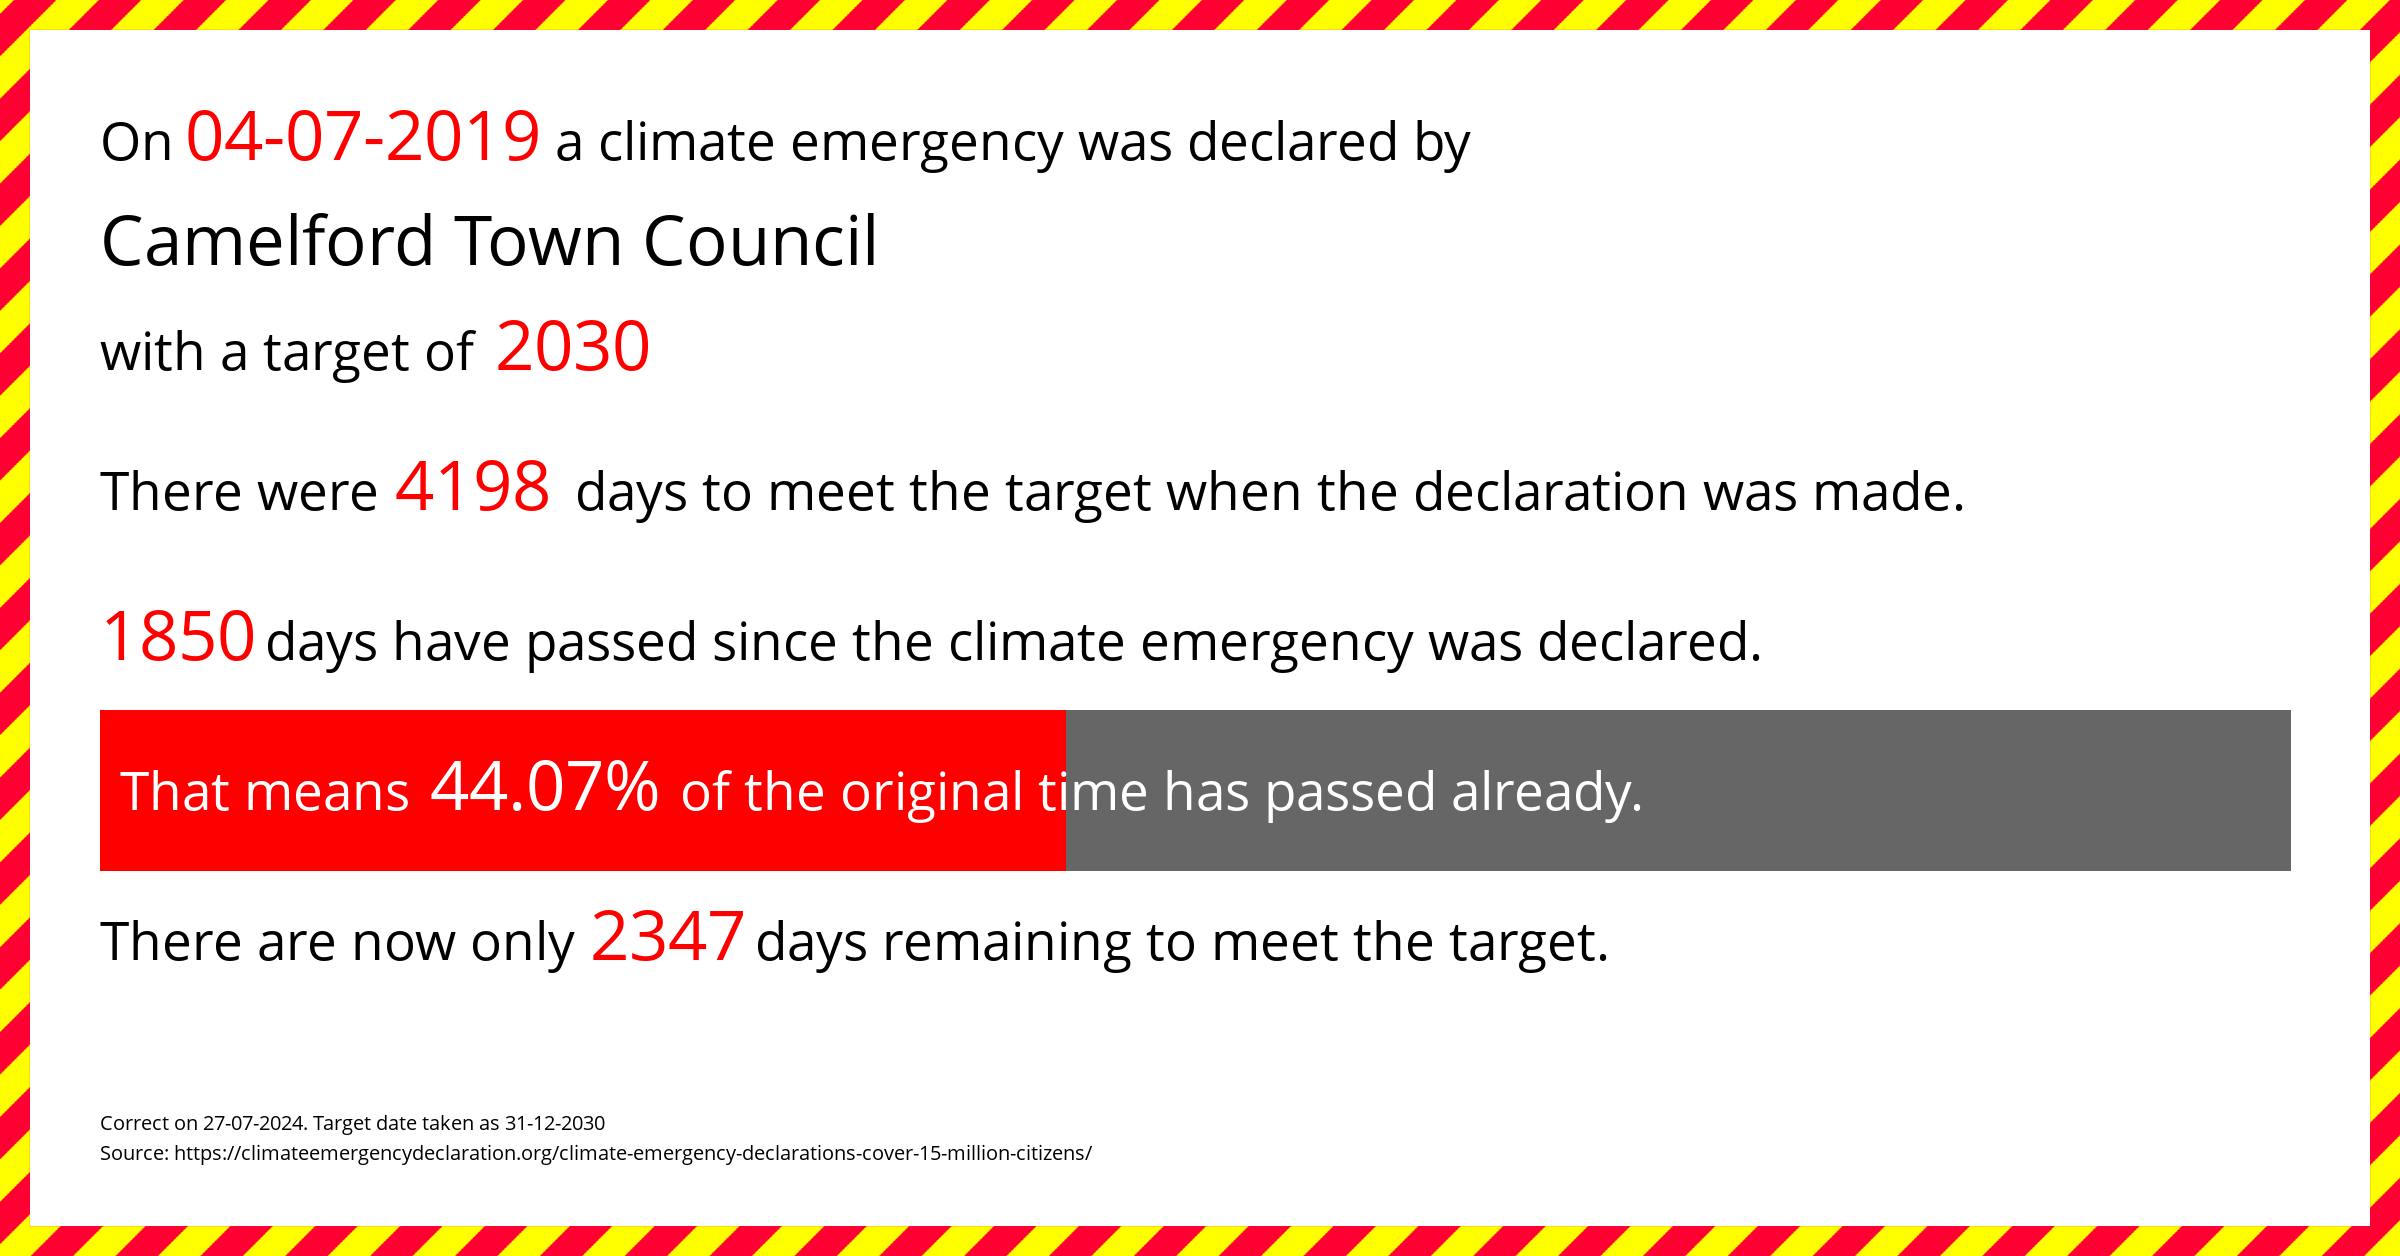 Camelford Town Council declared a Climate emergency on Thursday 4th July 2019, with a target of 2030.